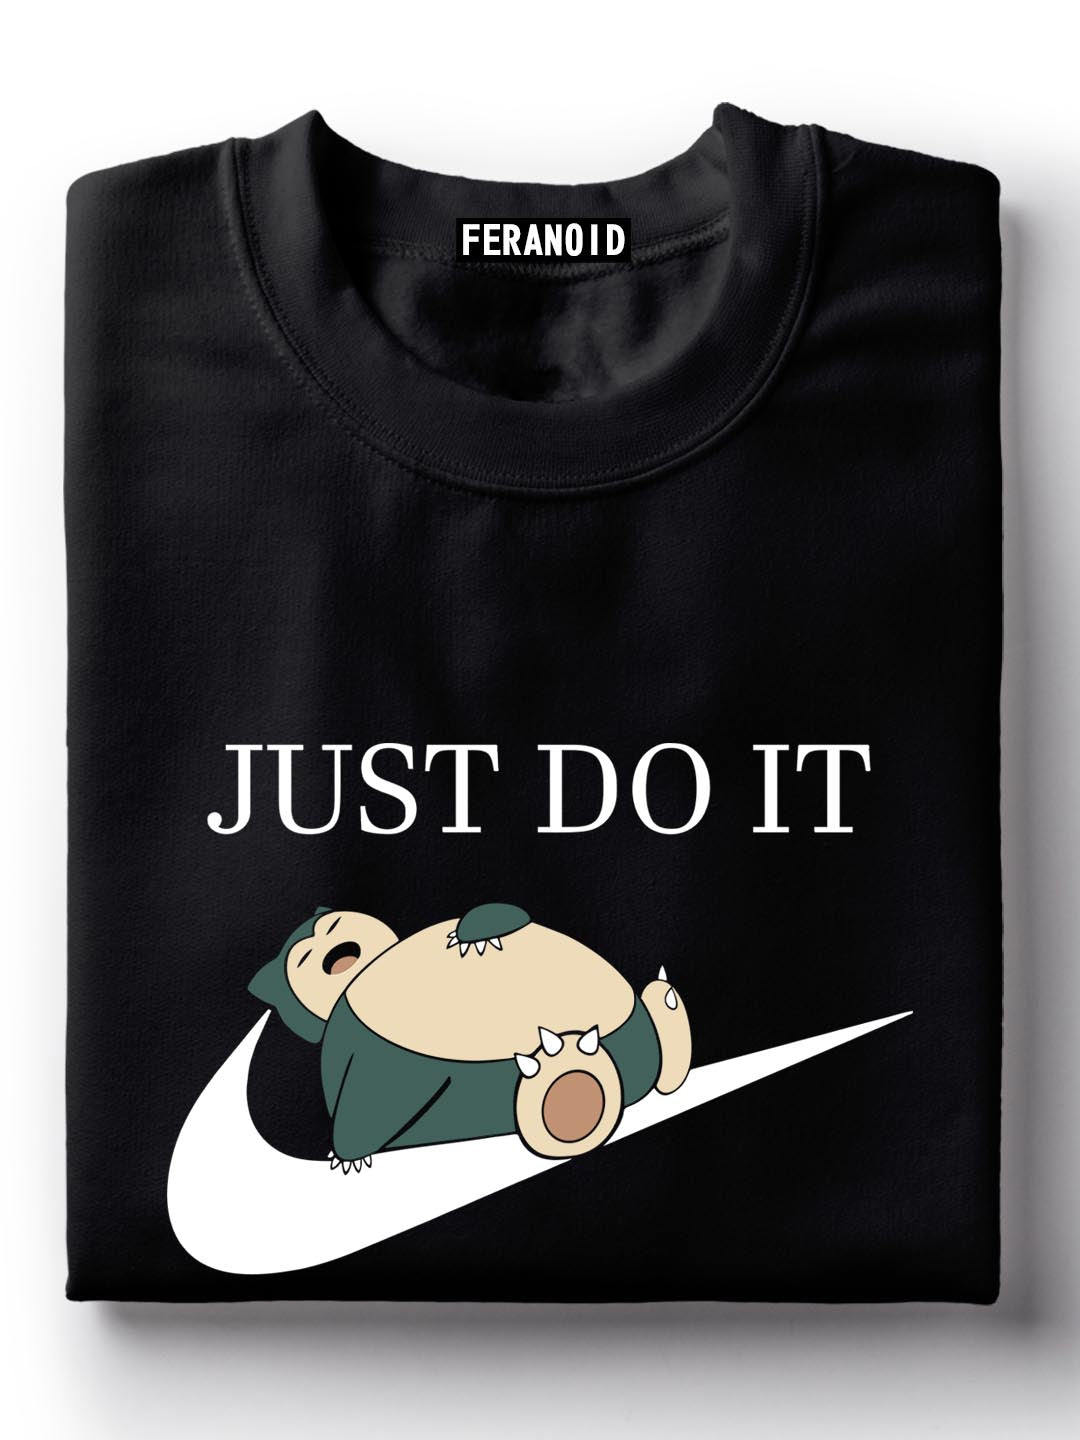 Just Do It Later Black T-Shirt